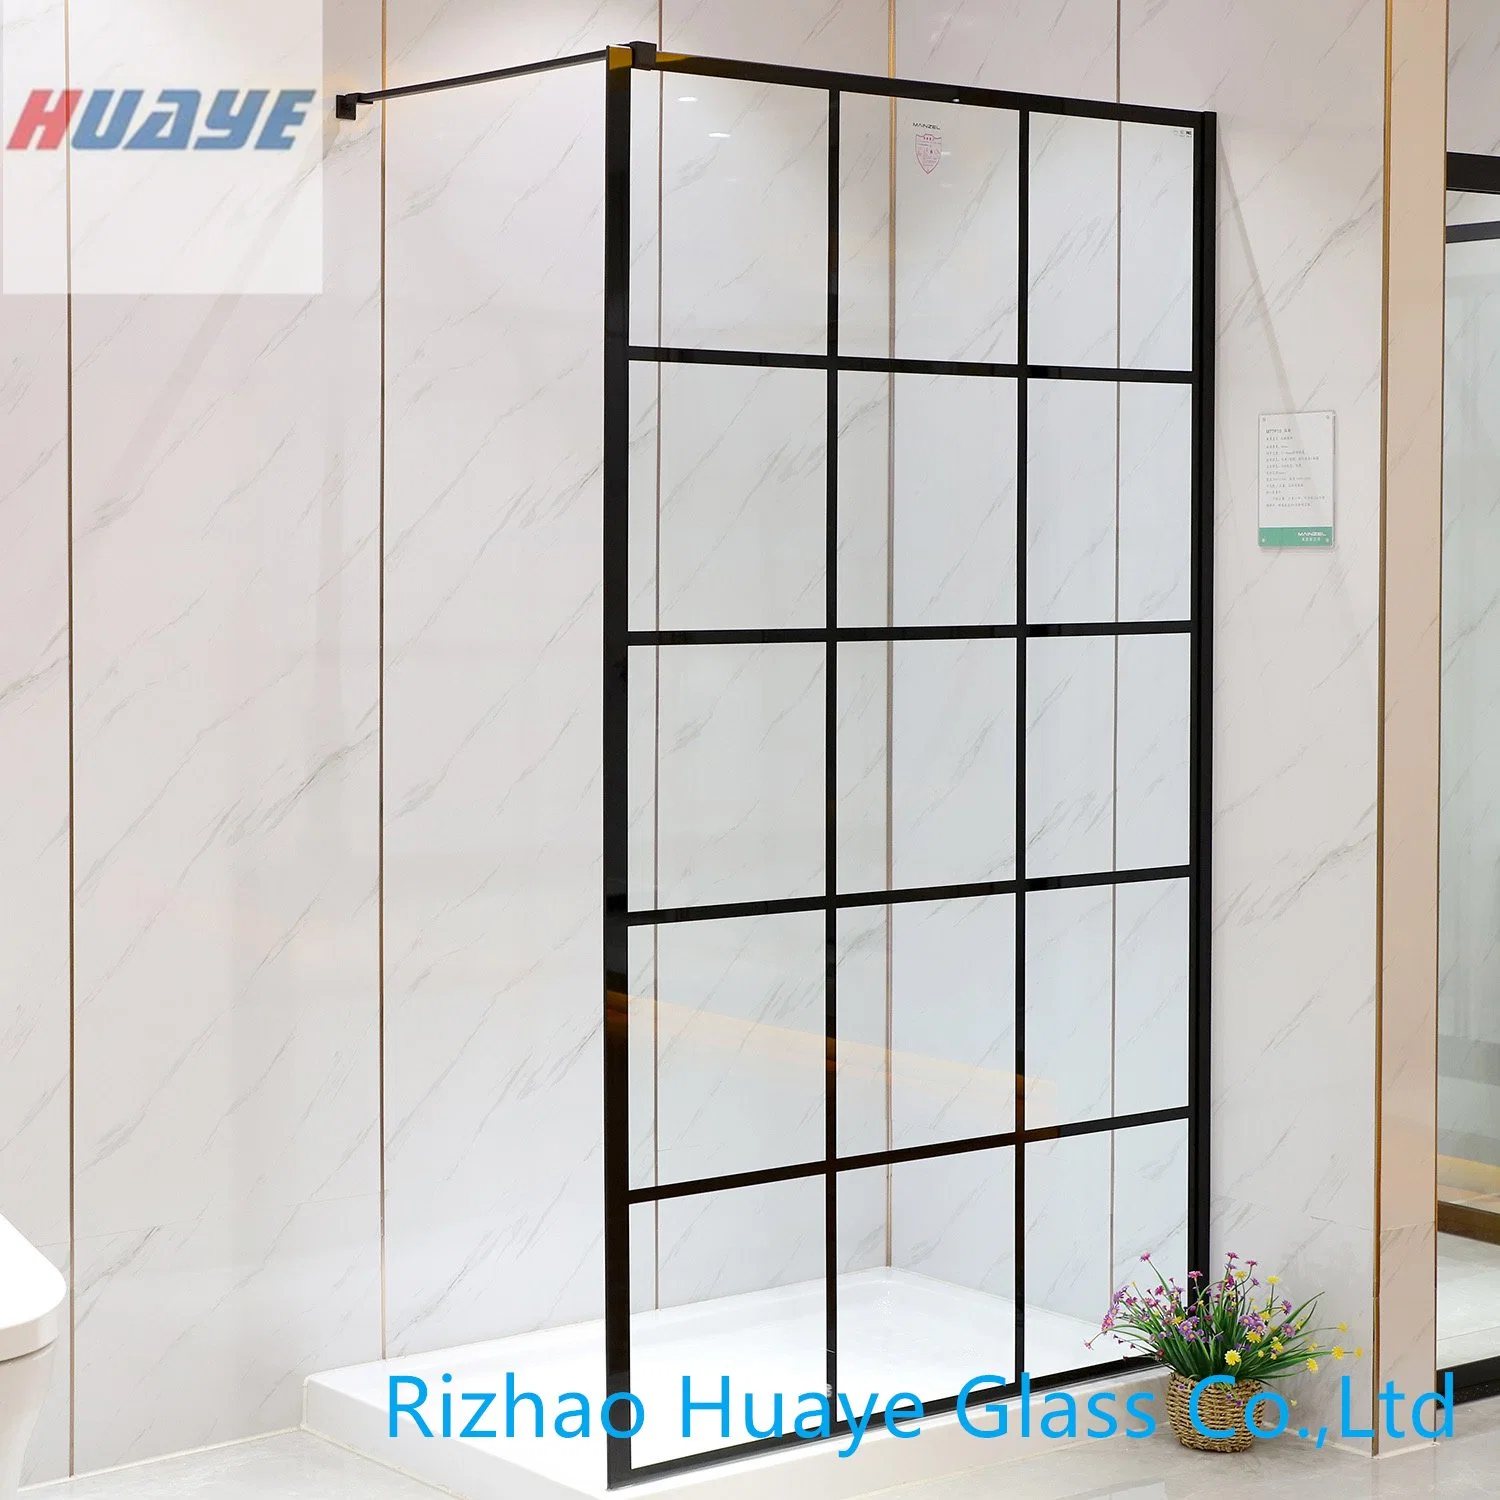 8mm ANSI Certificated Safety Tempered Buidling Glass Shower Screen with Ceramic Matte Black Finished